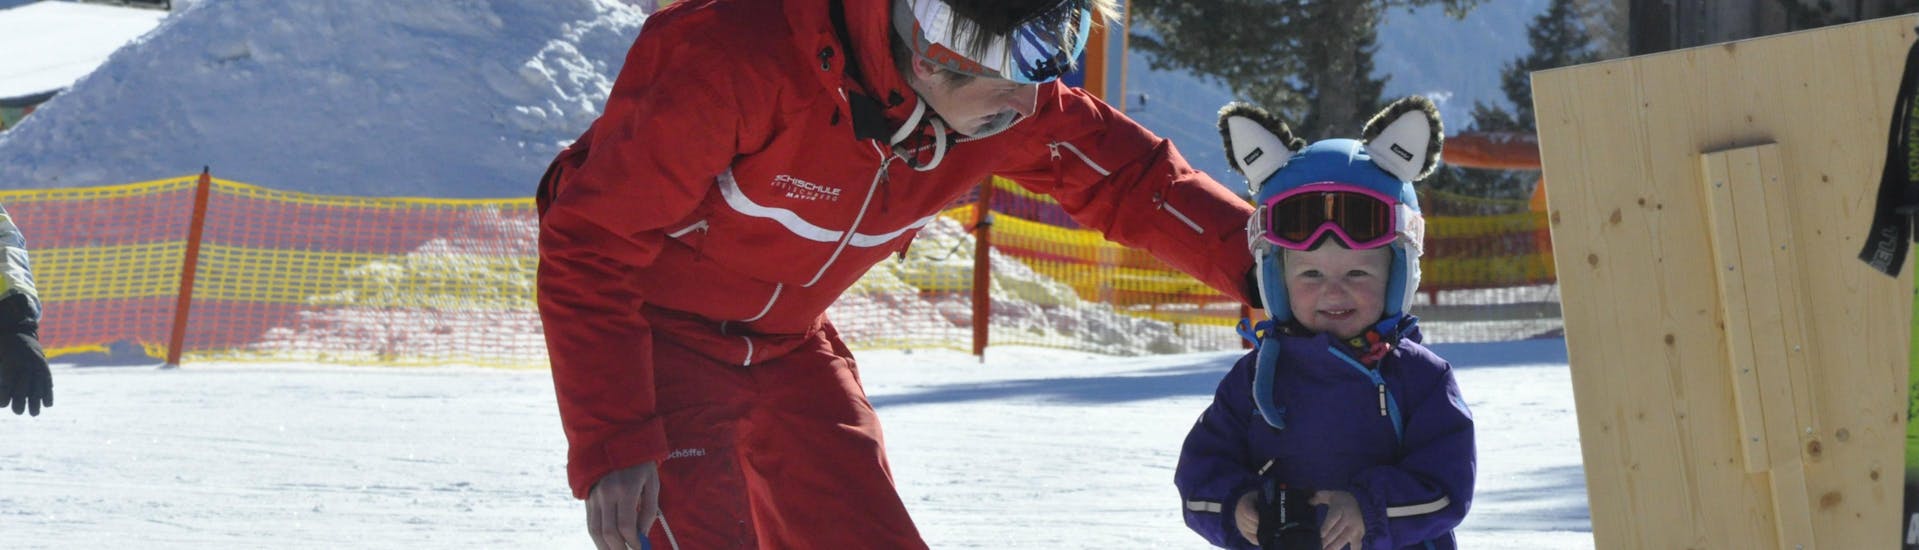 A private instructor with a little skier during de, private ski lessons for kids of all levels with the ski school Kreischberg - Mayer.